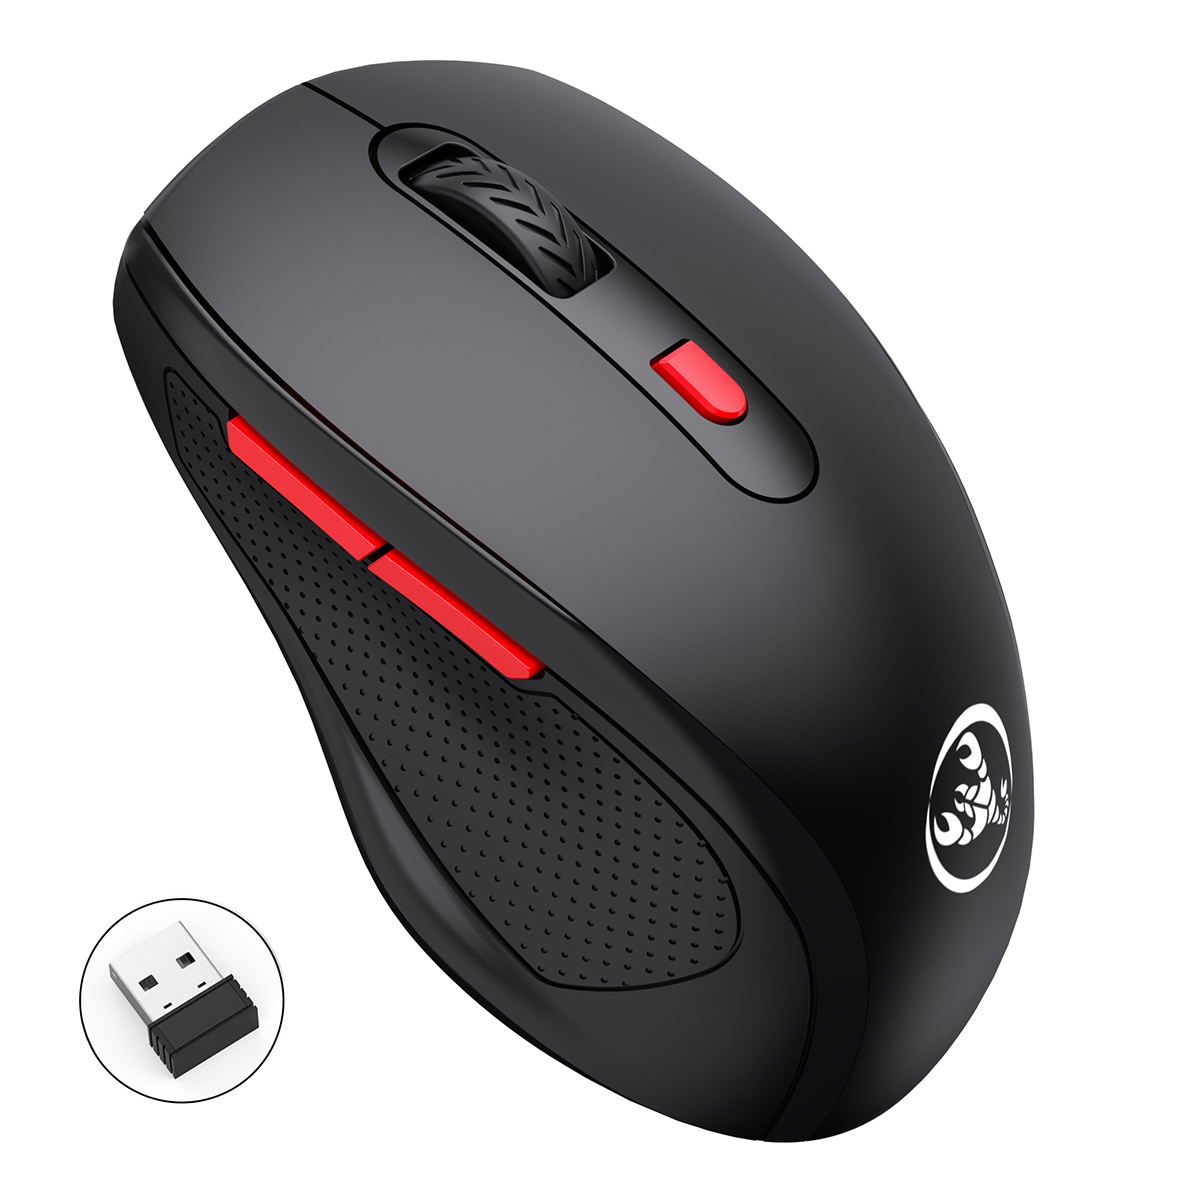 HXSJ T67 2.4G Wireless Mouse 1600DPI 6 Buttons Ergonomic Energy Saving Home Office Business Gaming Mouse with USB Receiver